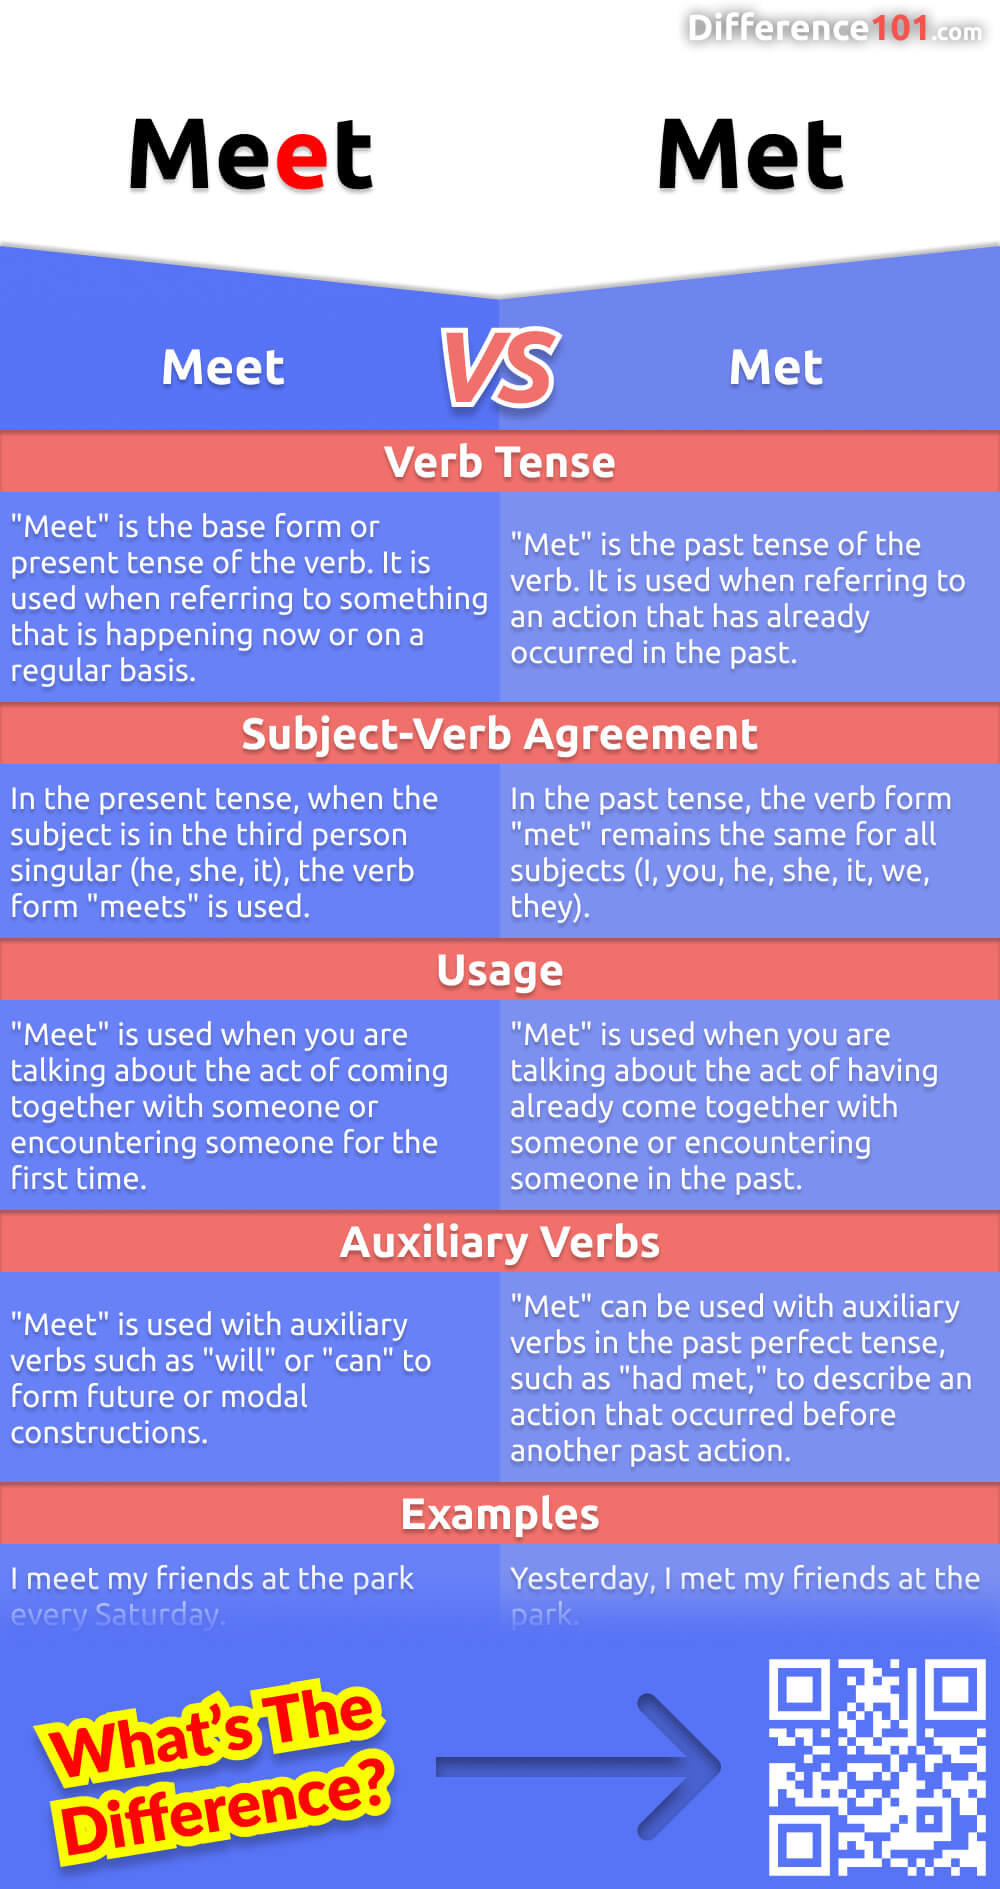 Everything you need to know about the difference between Meet and Met. Unravel the grammar mysteries, understand their tenses, and grasp the context of when to use each. Enhance your language skills and avoid common mistakes.